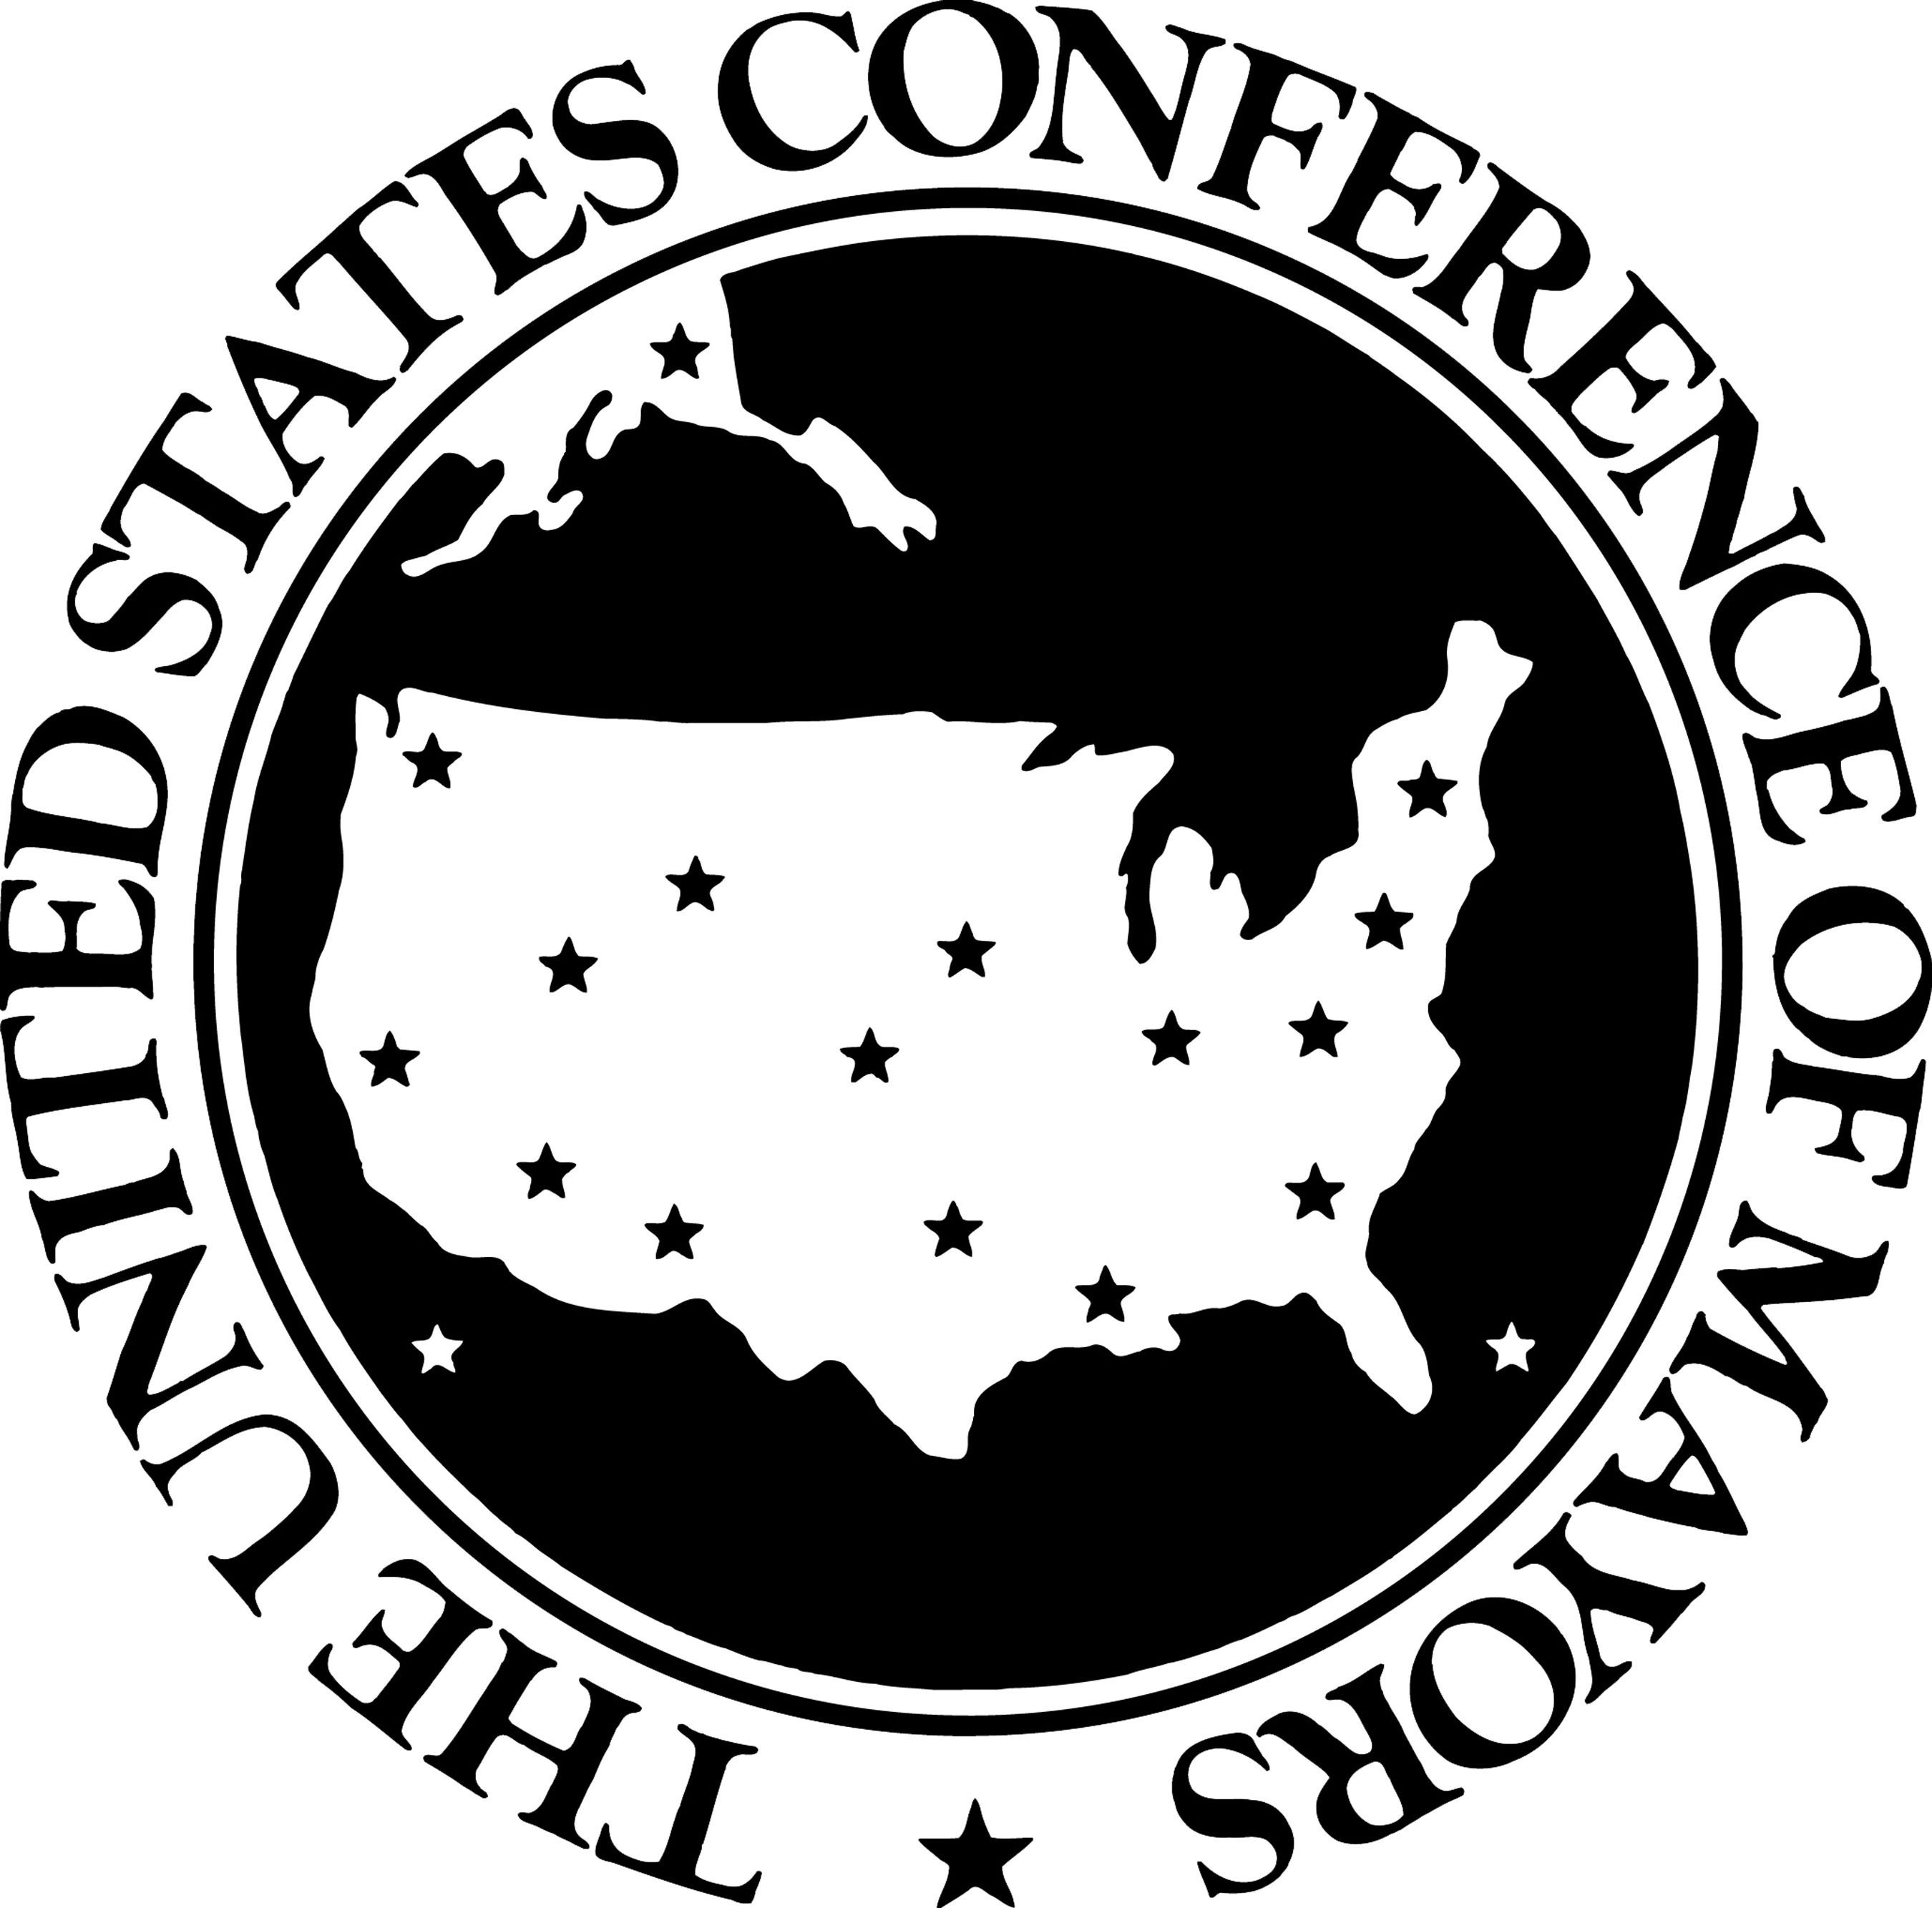 U.S. Conference of Mayors.